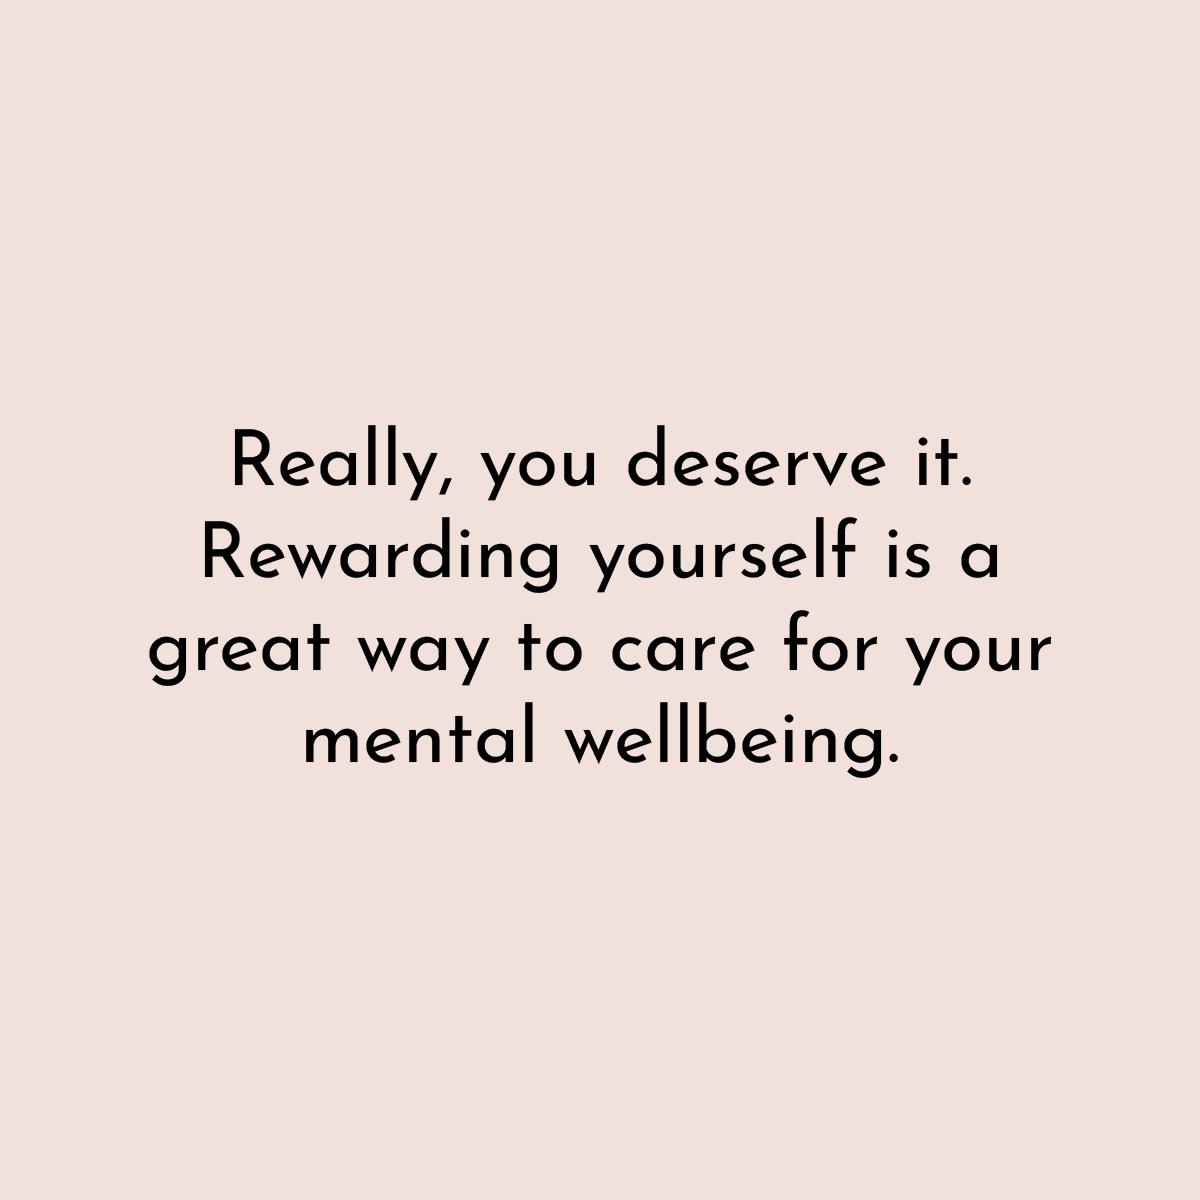 Really, you deserve it. Rewarding yourself is a great way to care for your mental wellbeing.